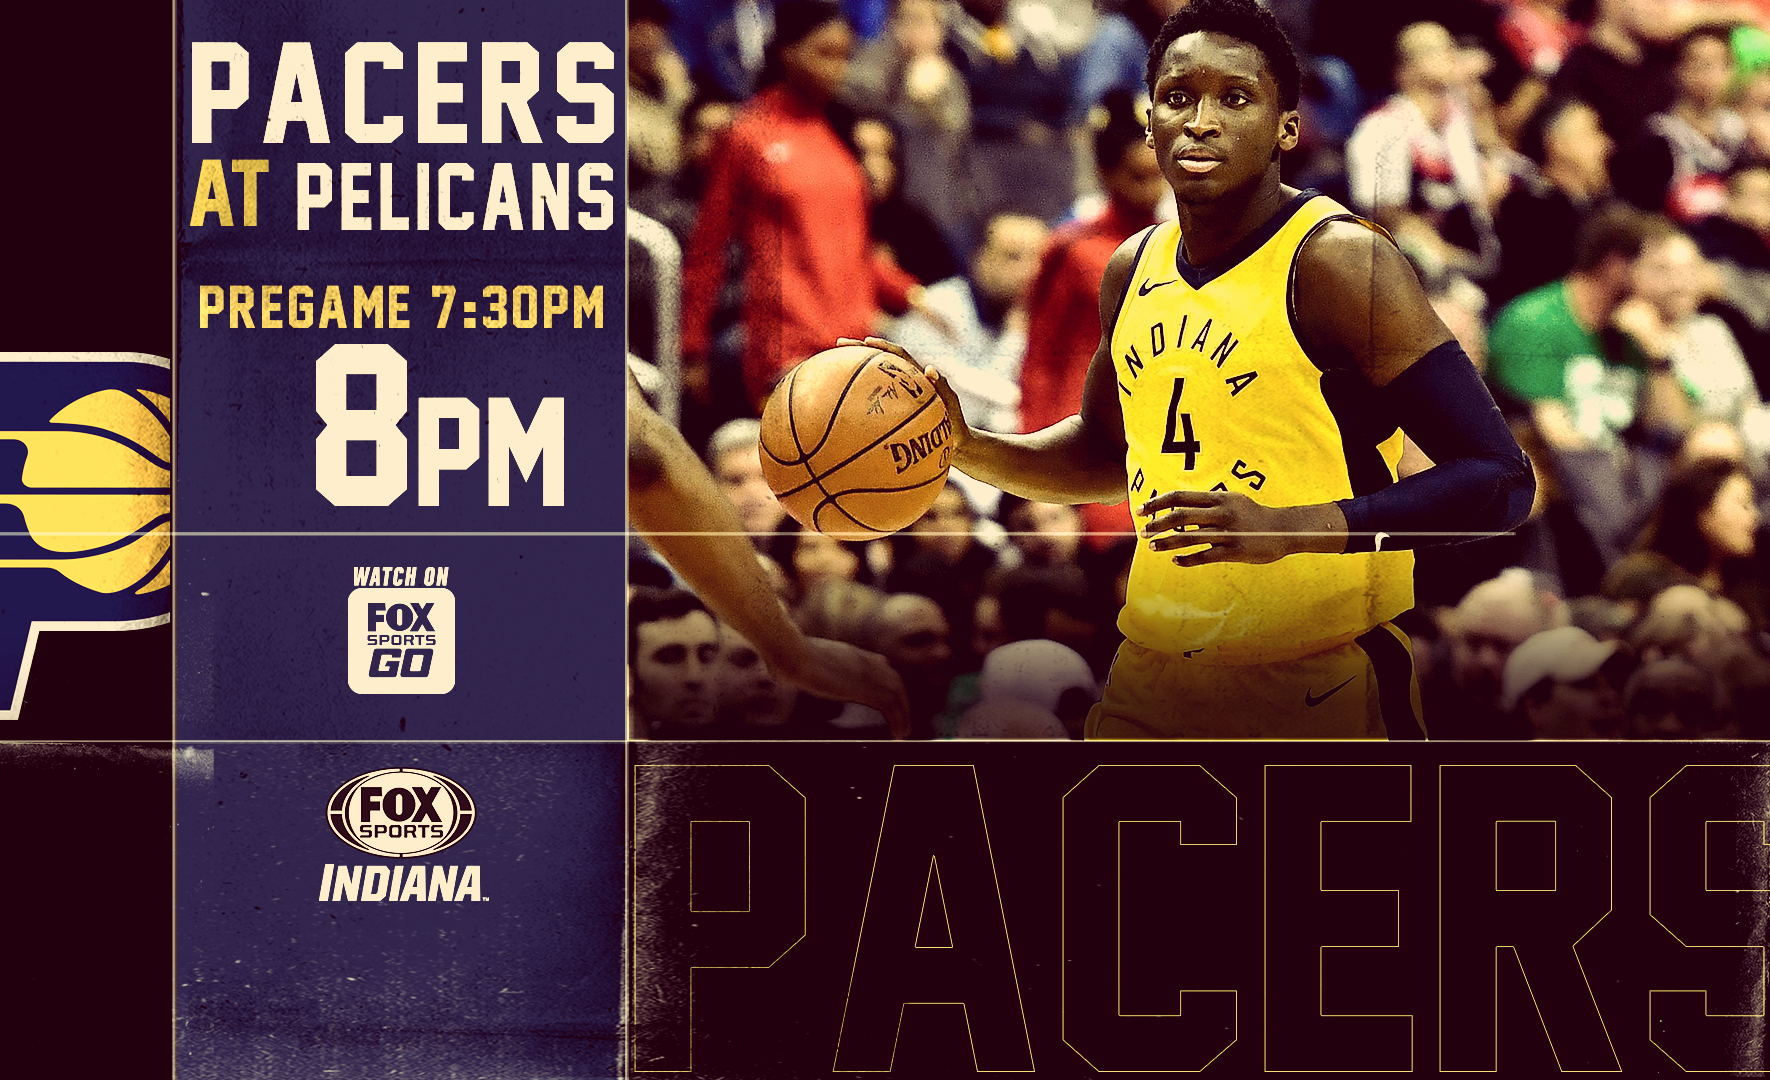 Pacers' 'rainout' makeup finds Pelicans in middle game of 'tripleheader'